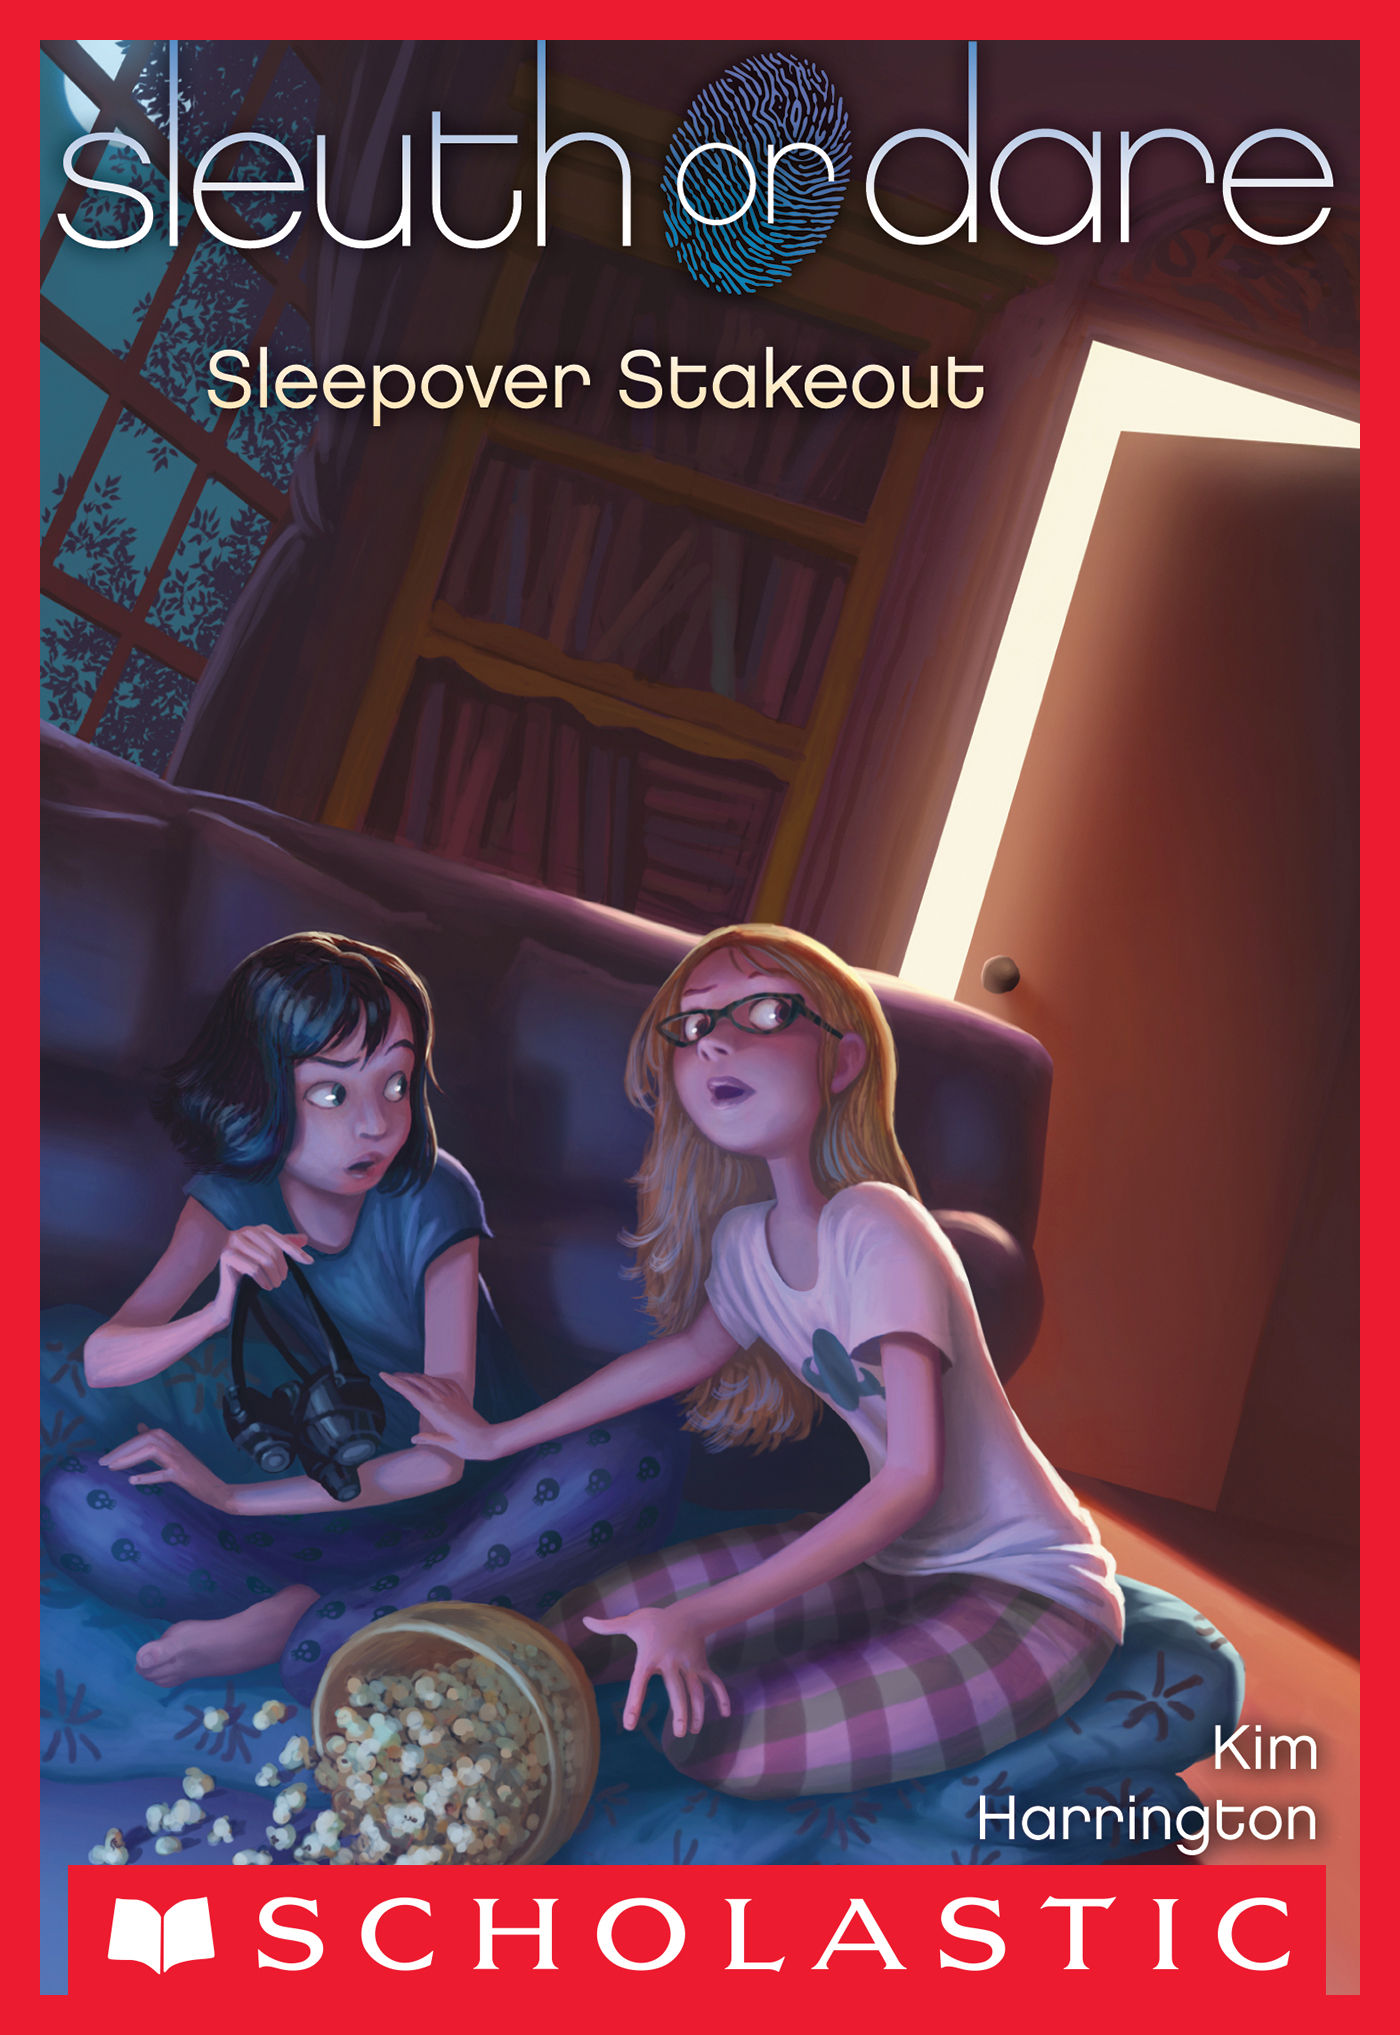 Sleepover Stakeout (Sleuth or Dare #2)